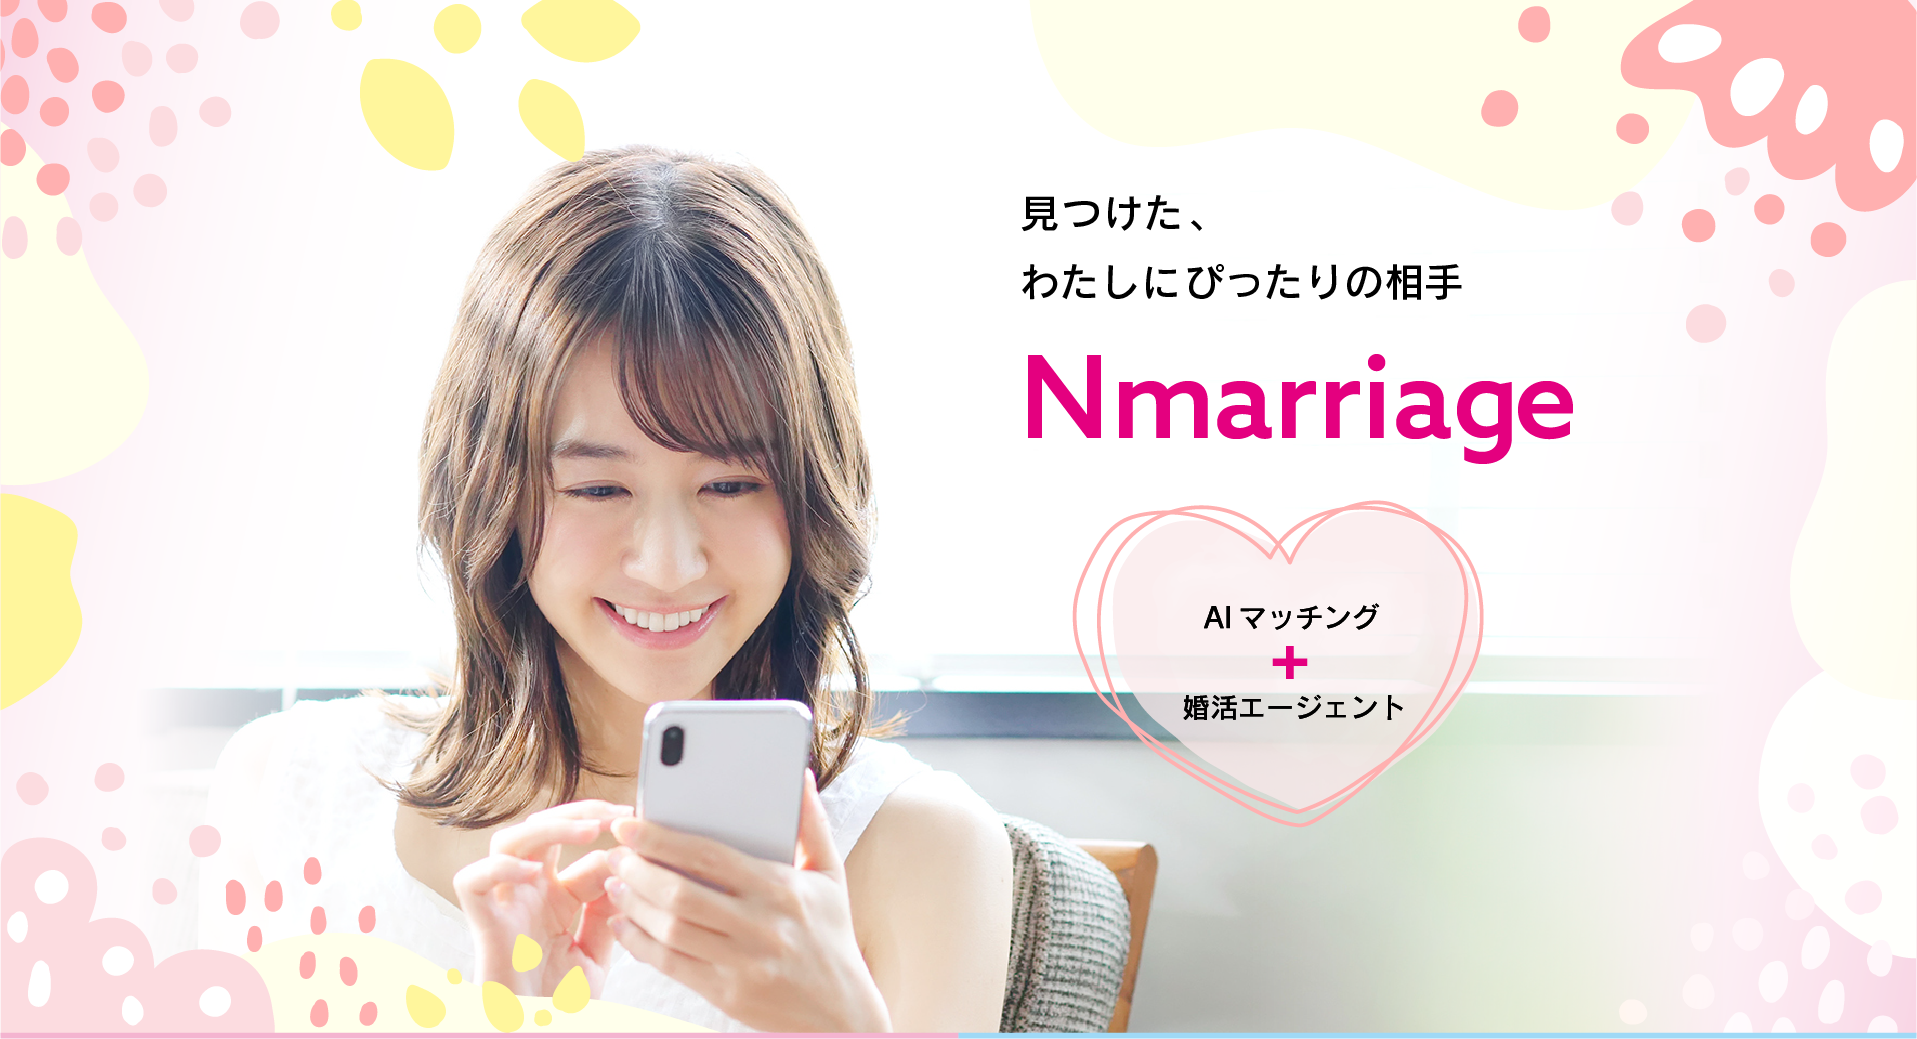 Nmarriage